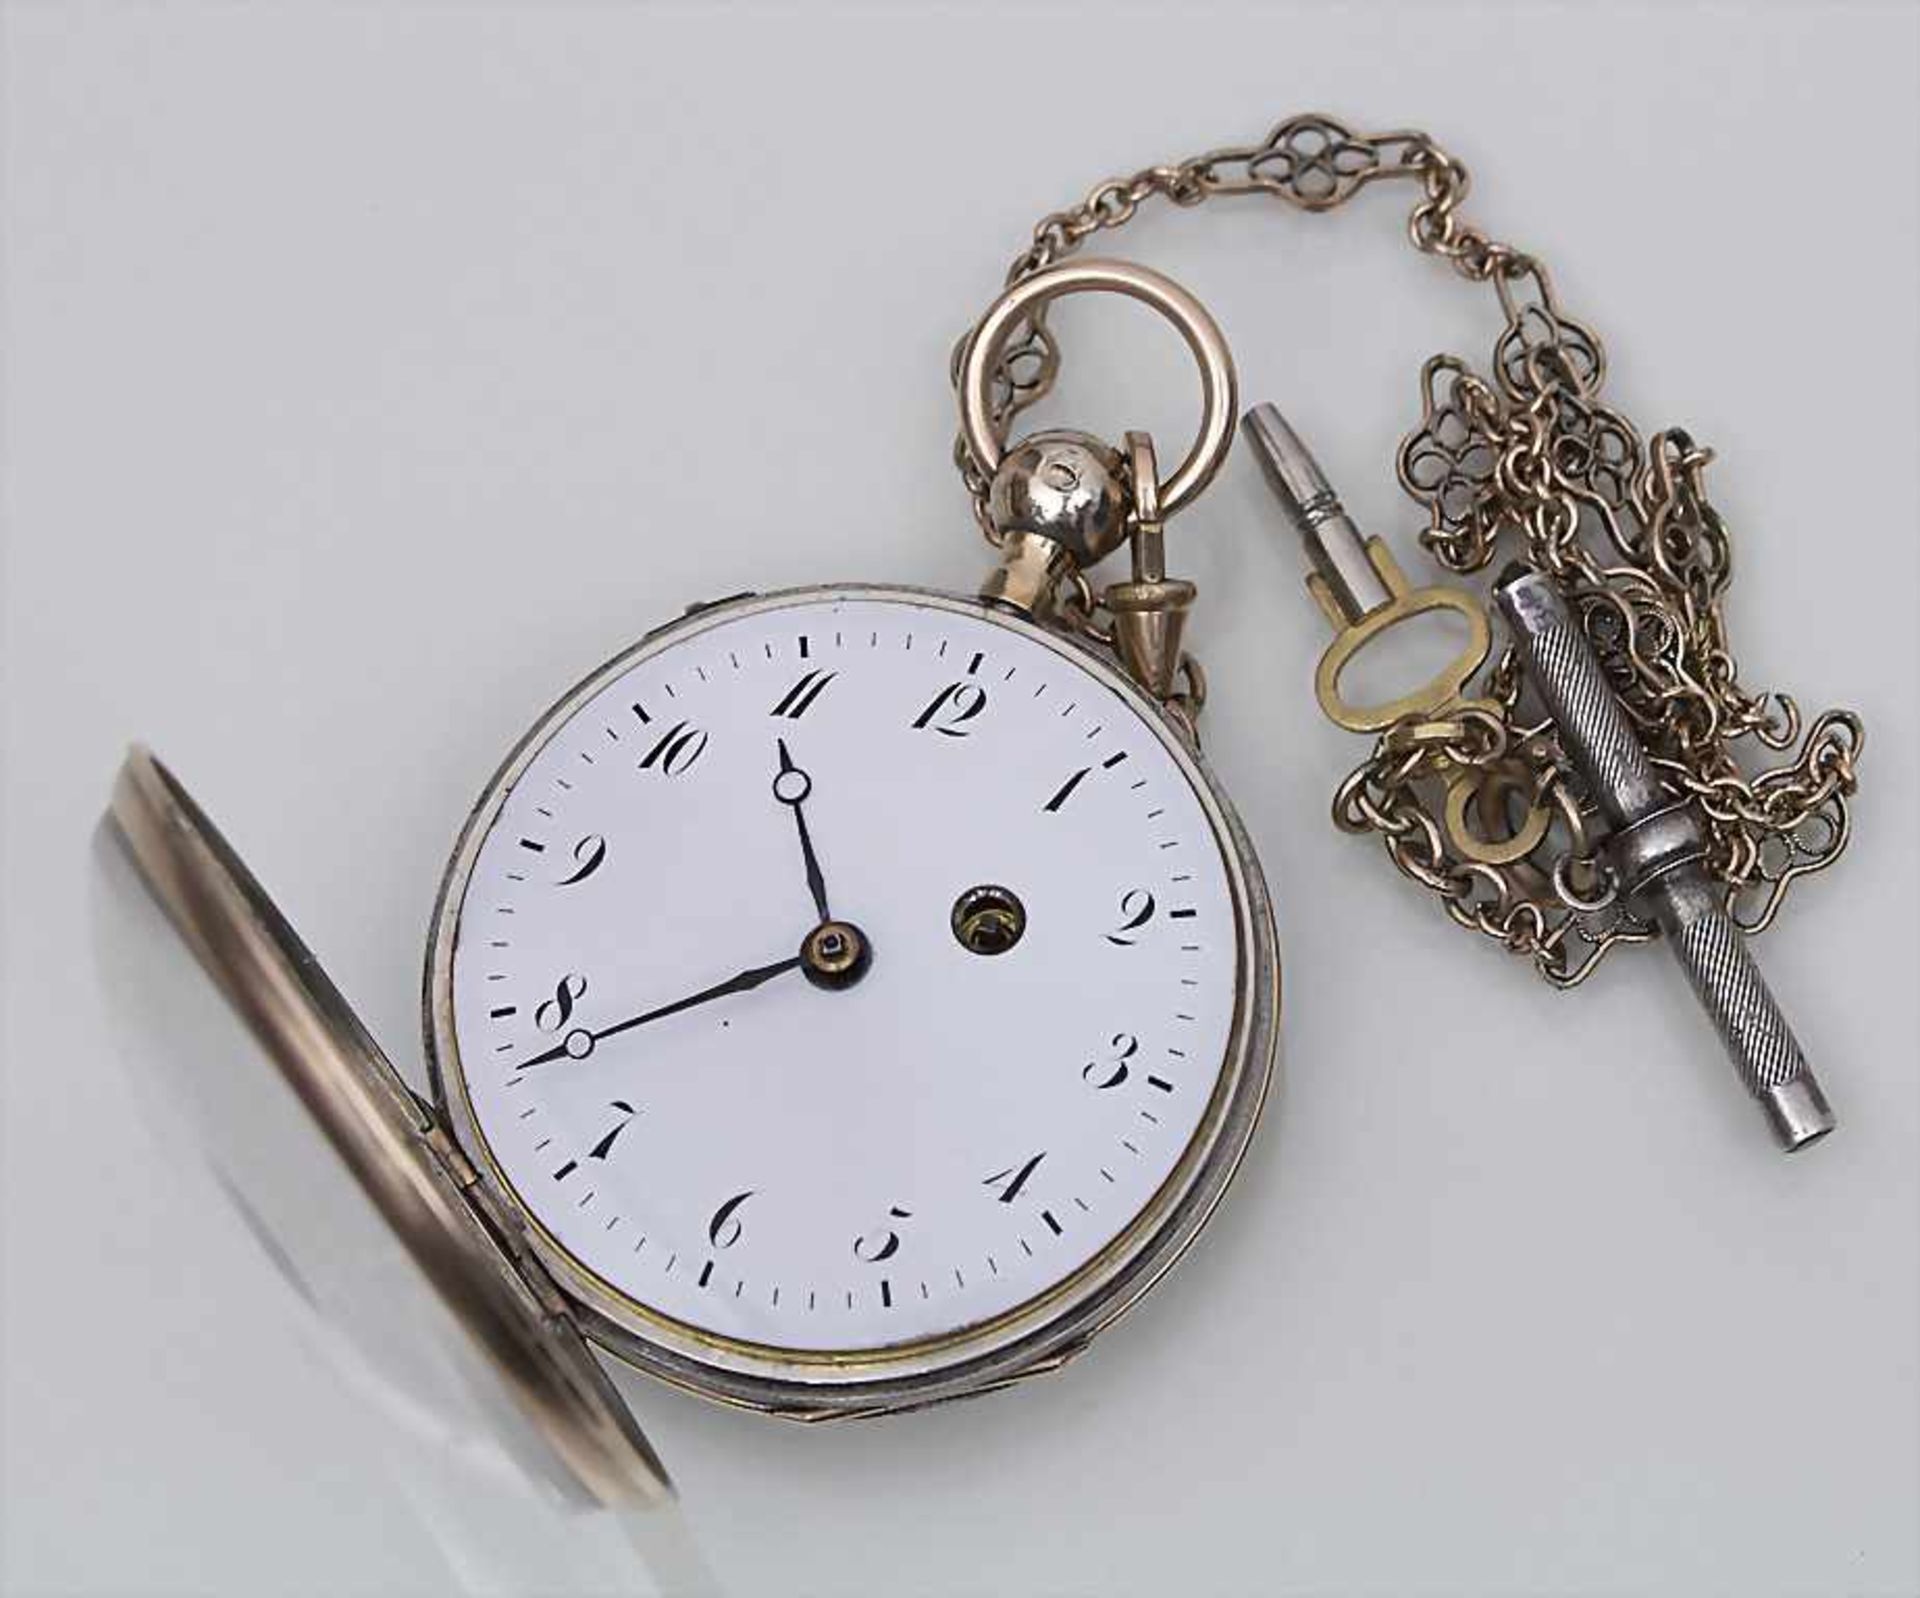 Taschenuhr / Pocket Watch, ¼-Repetition, Swiss Made, ca. 1850Gehäuse: Rotgold/Silber, Nr.